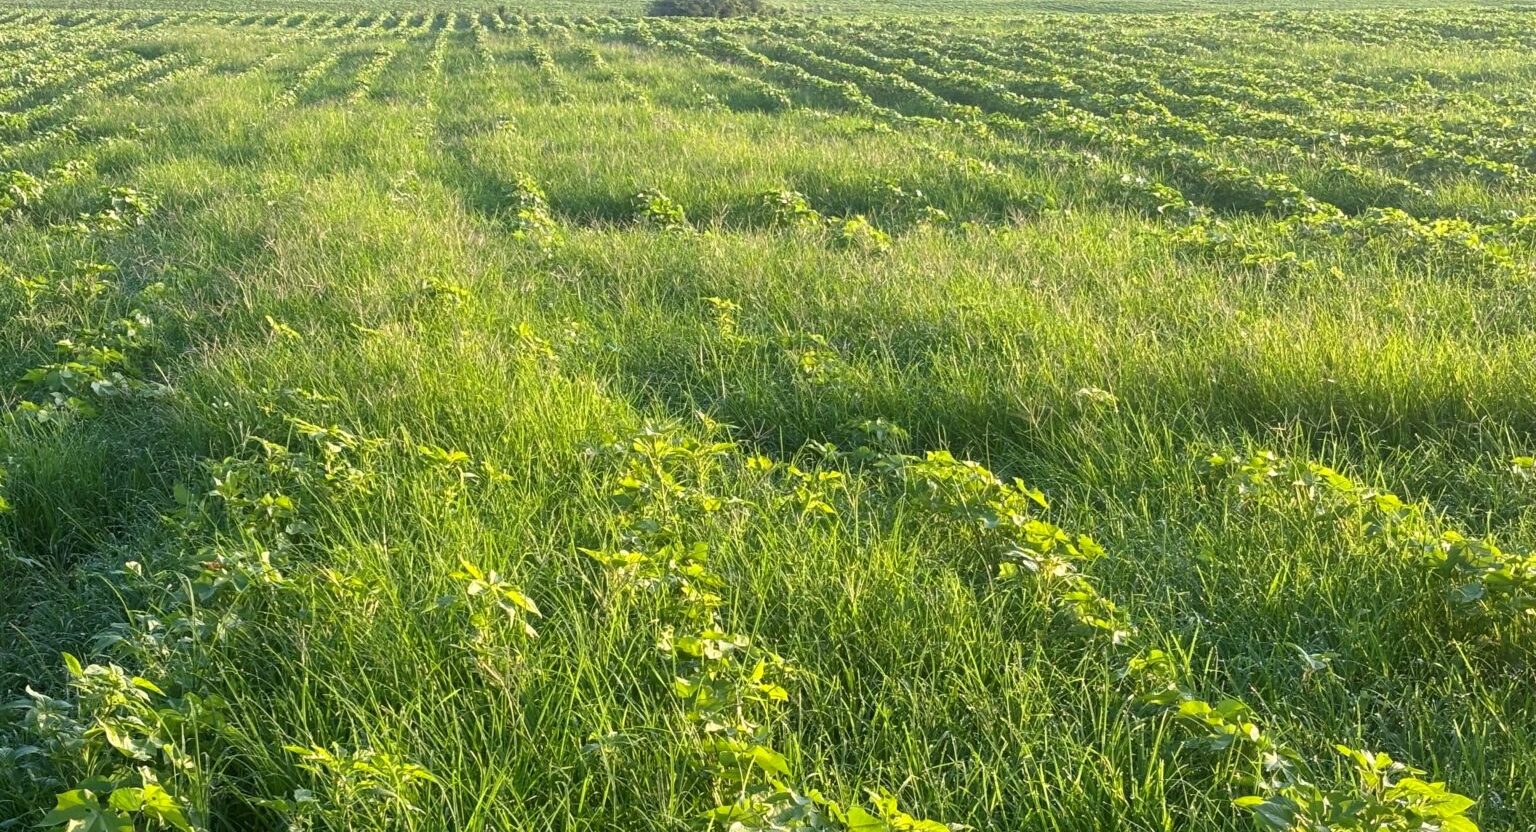 Goosegrass growing in a cotton field